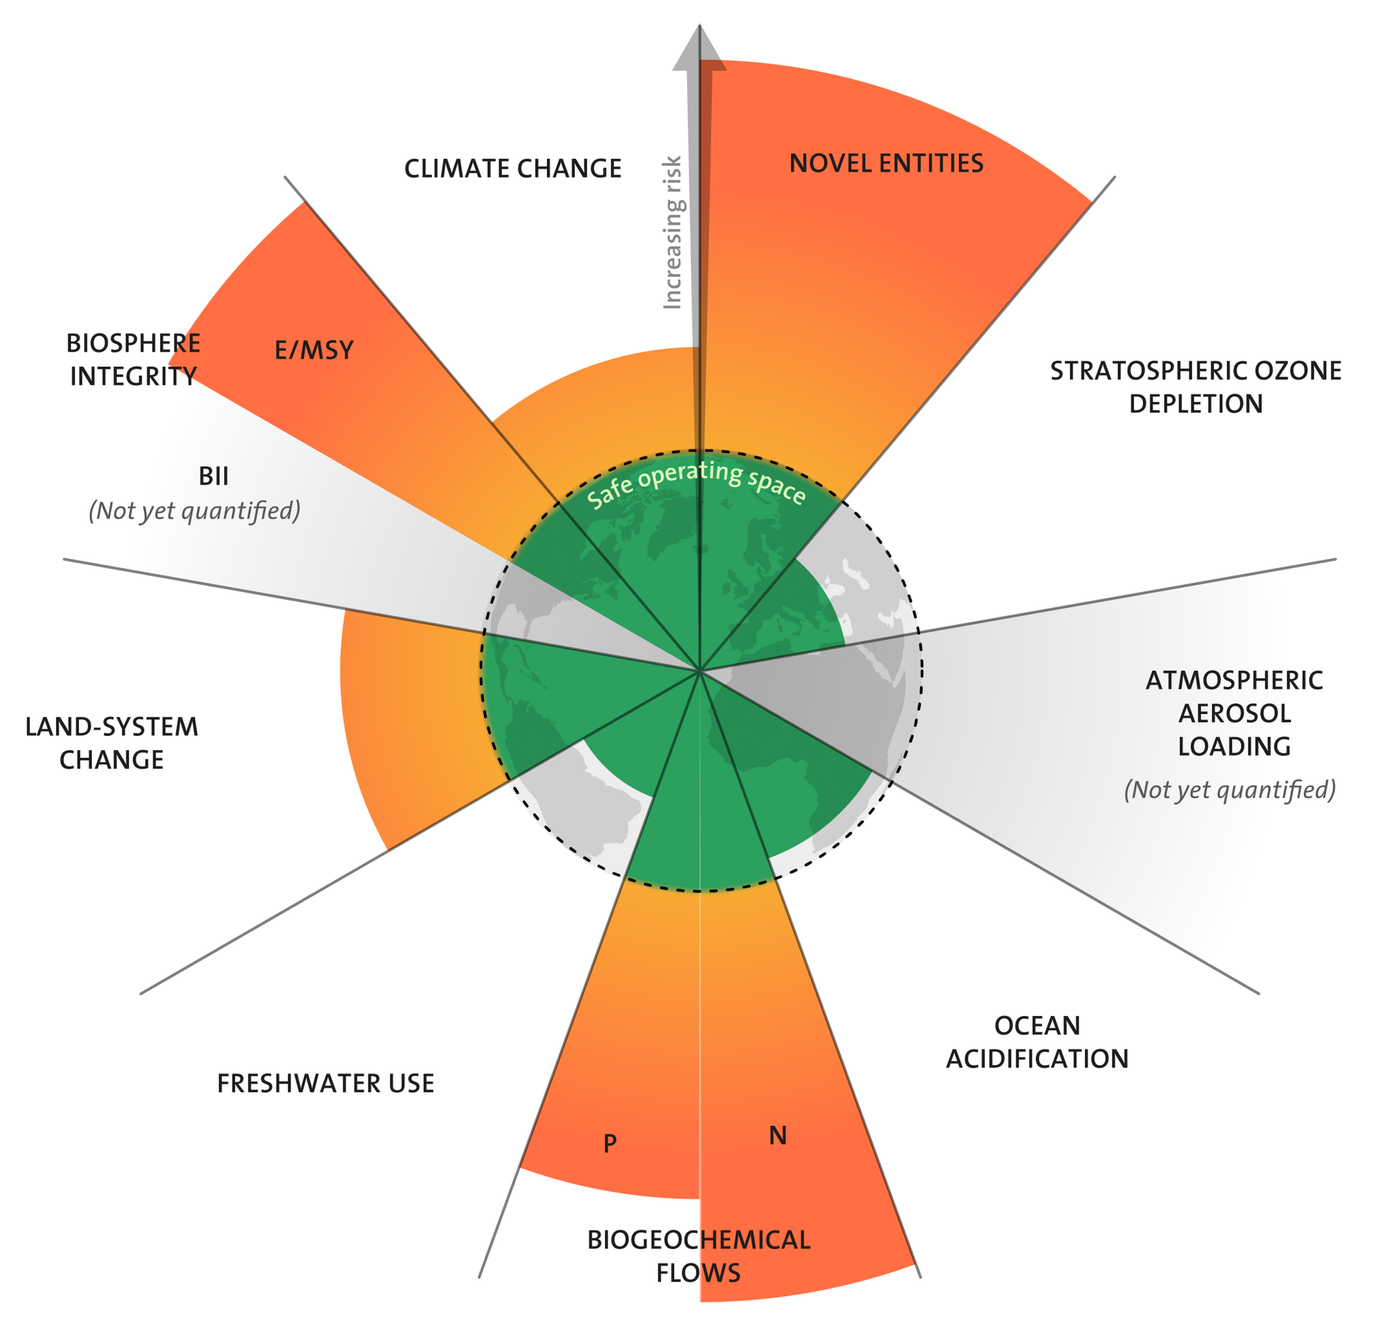 Planetary boundaries to help policy assessment in climate crisis